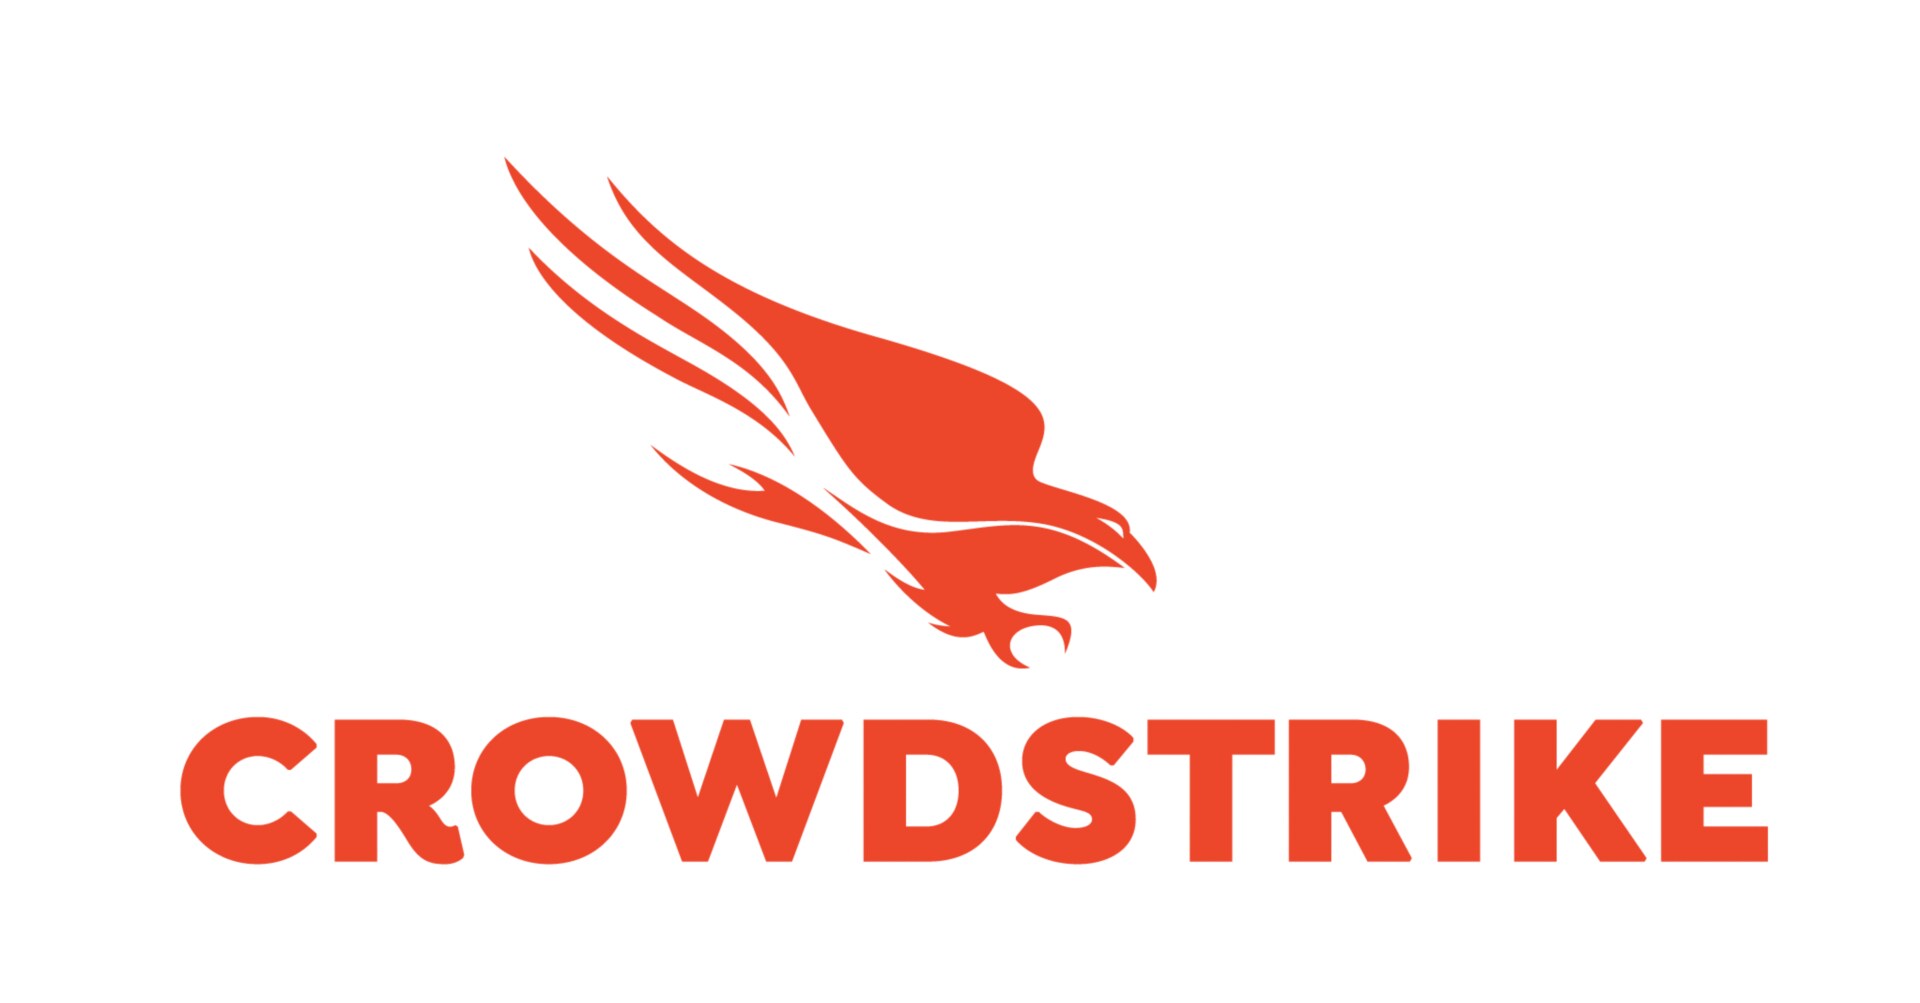 CrowdStrike 12-Month Falcon Device Control Software Subscription (2,000-2,499 Licenses)